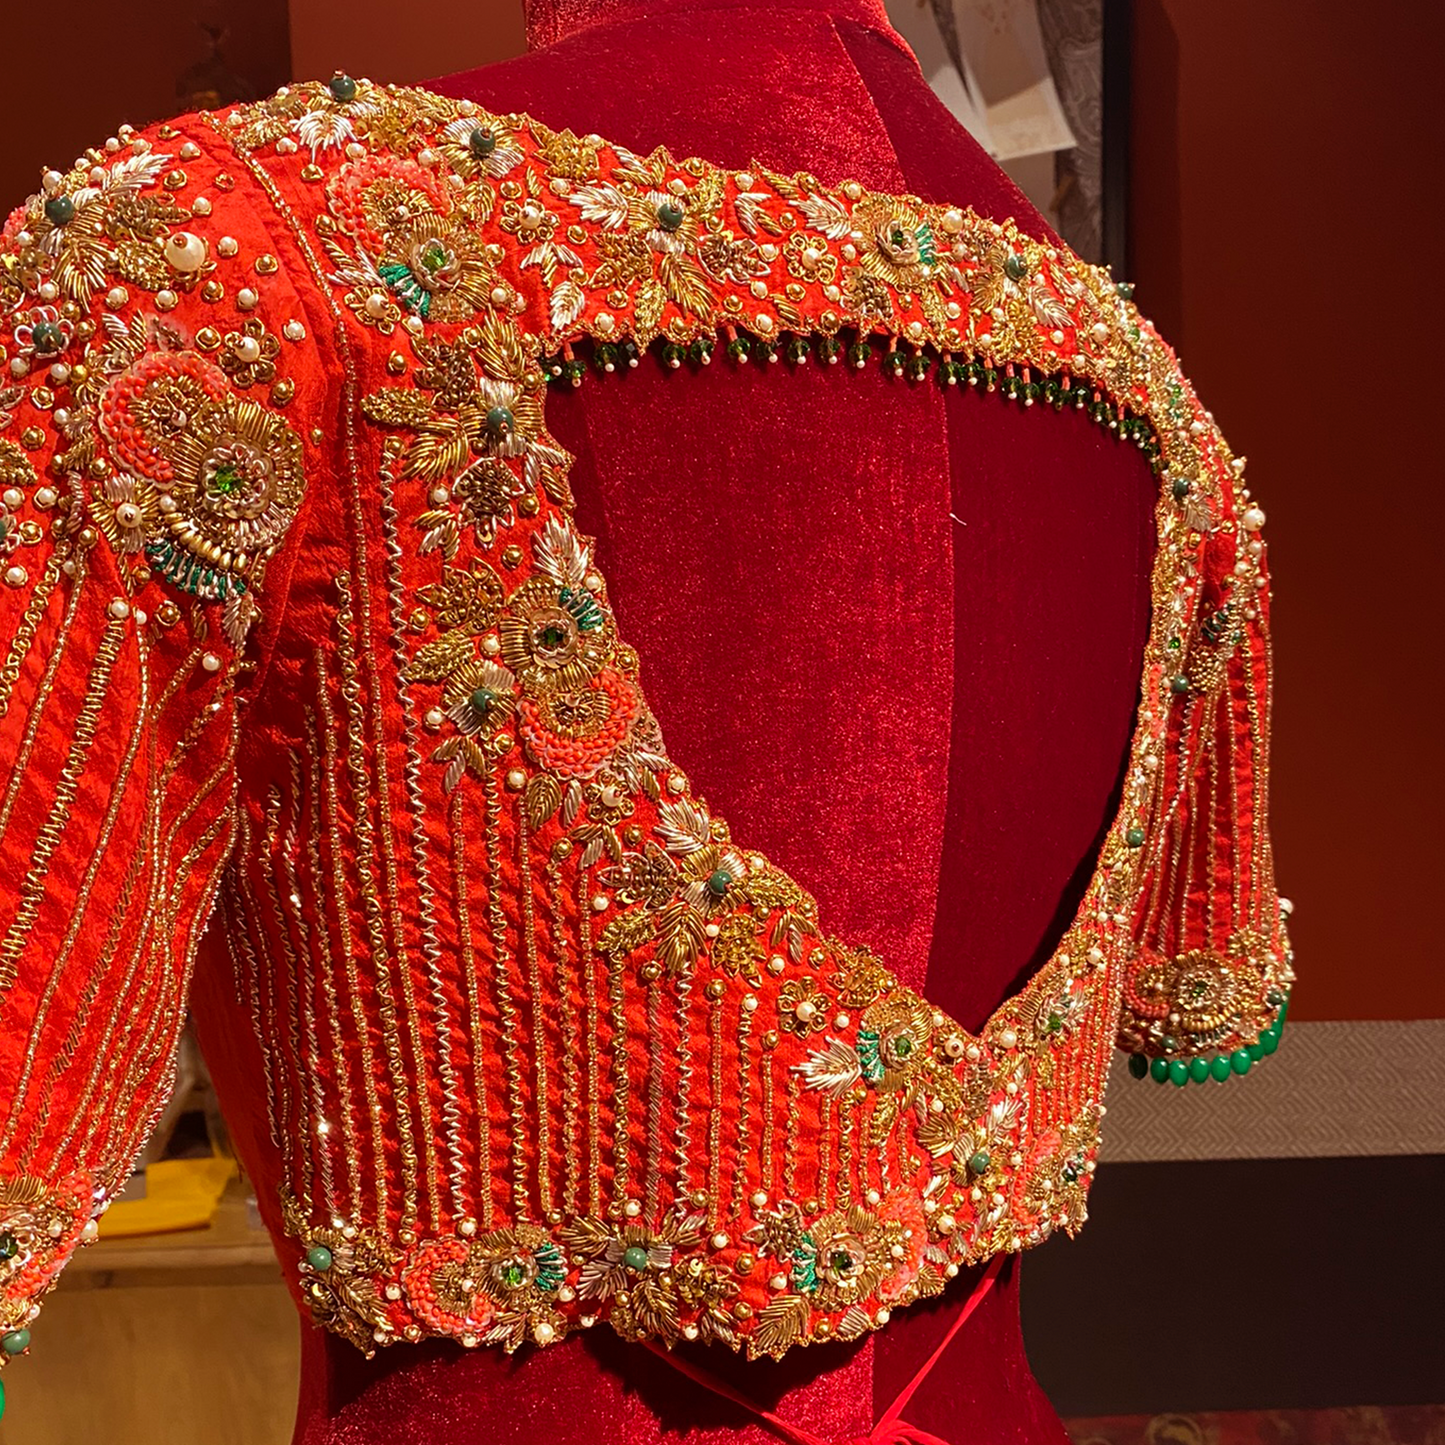 Intricate Zardosi - Beaded Bridal Blouse (excluding fabric cost)